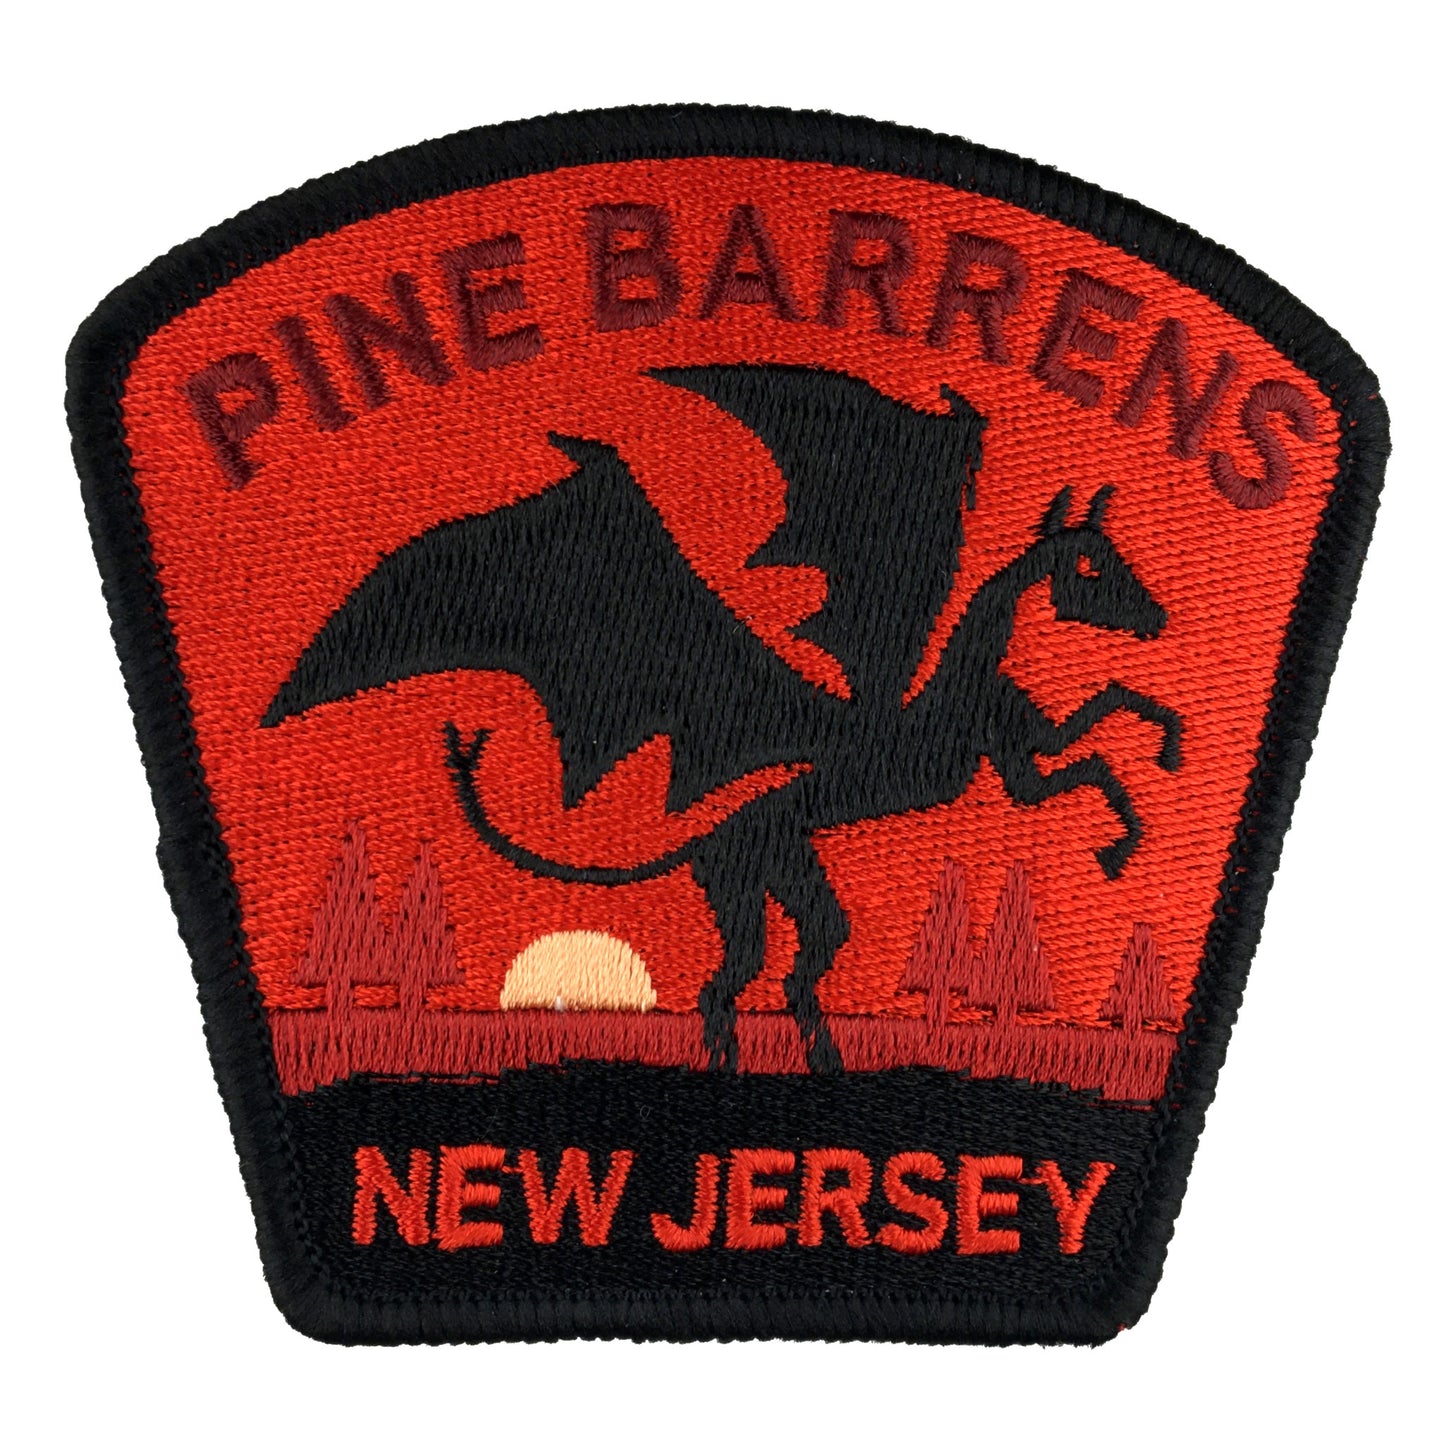 Pine Barrens New Jersey Devil travel patch by Monsterologist.